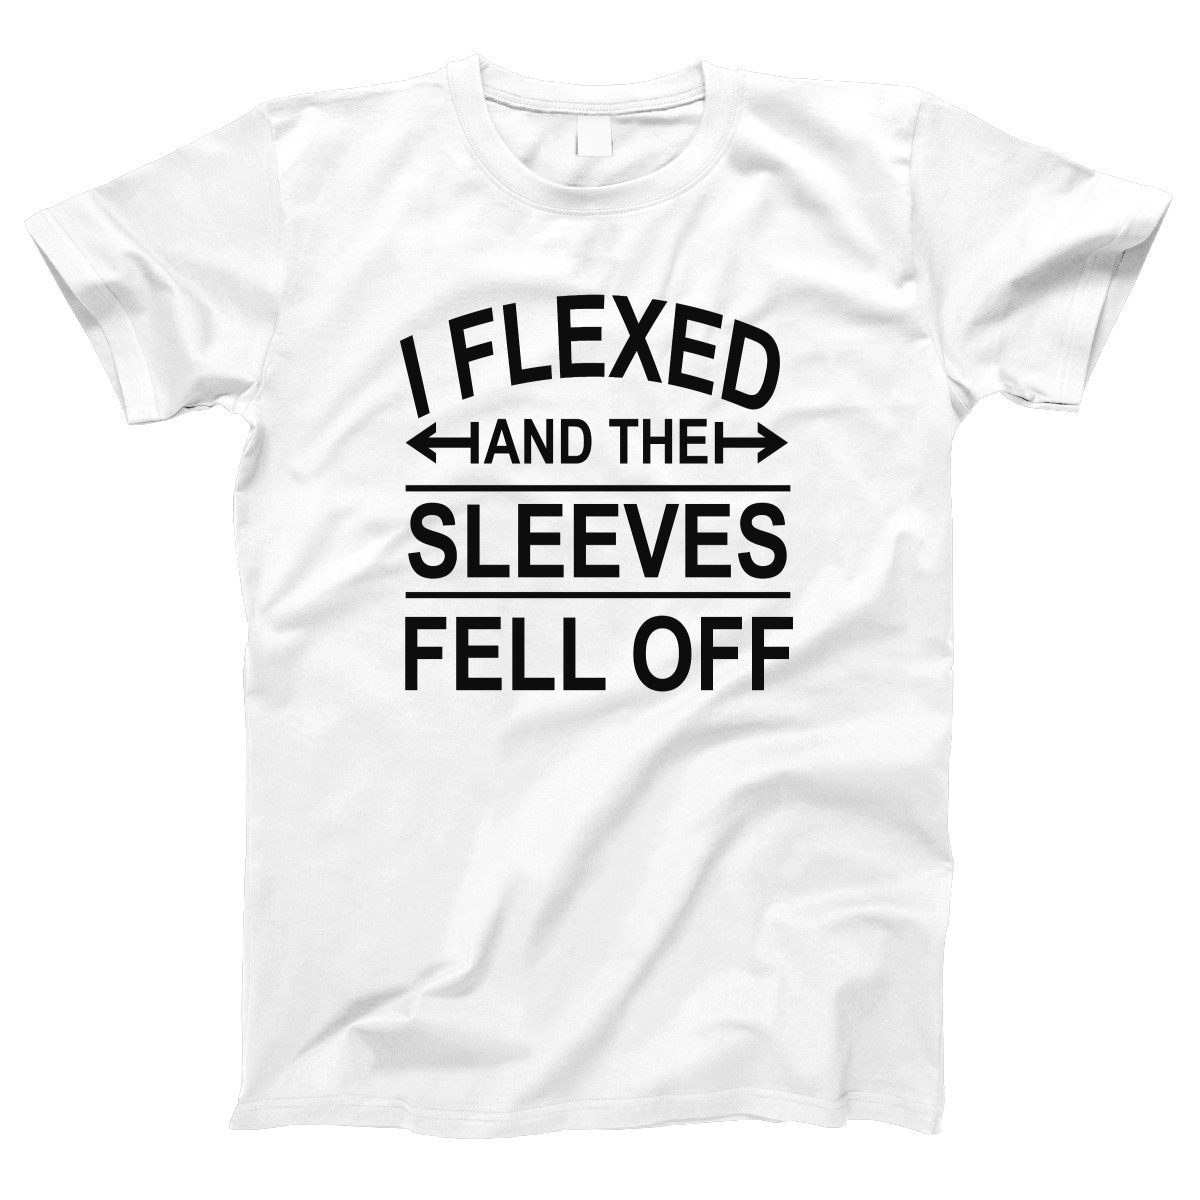 I Flexed and the sleeves fell off Women's T-shirt | White